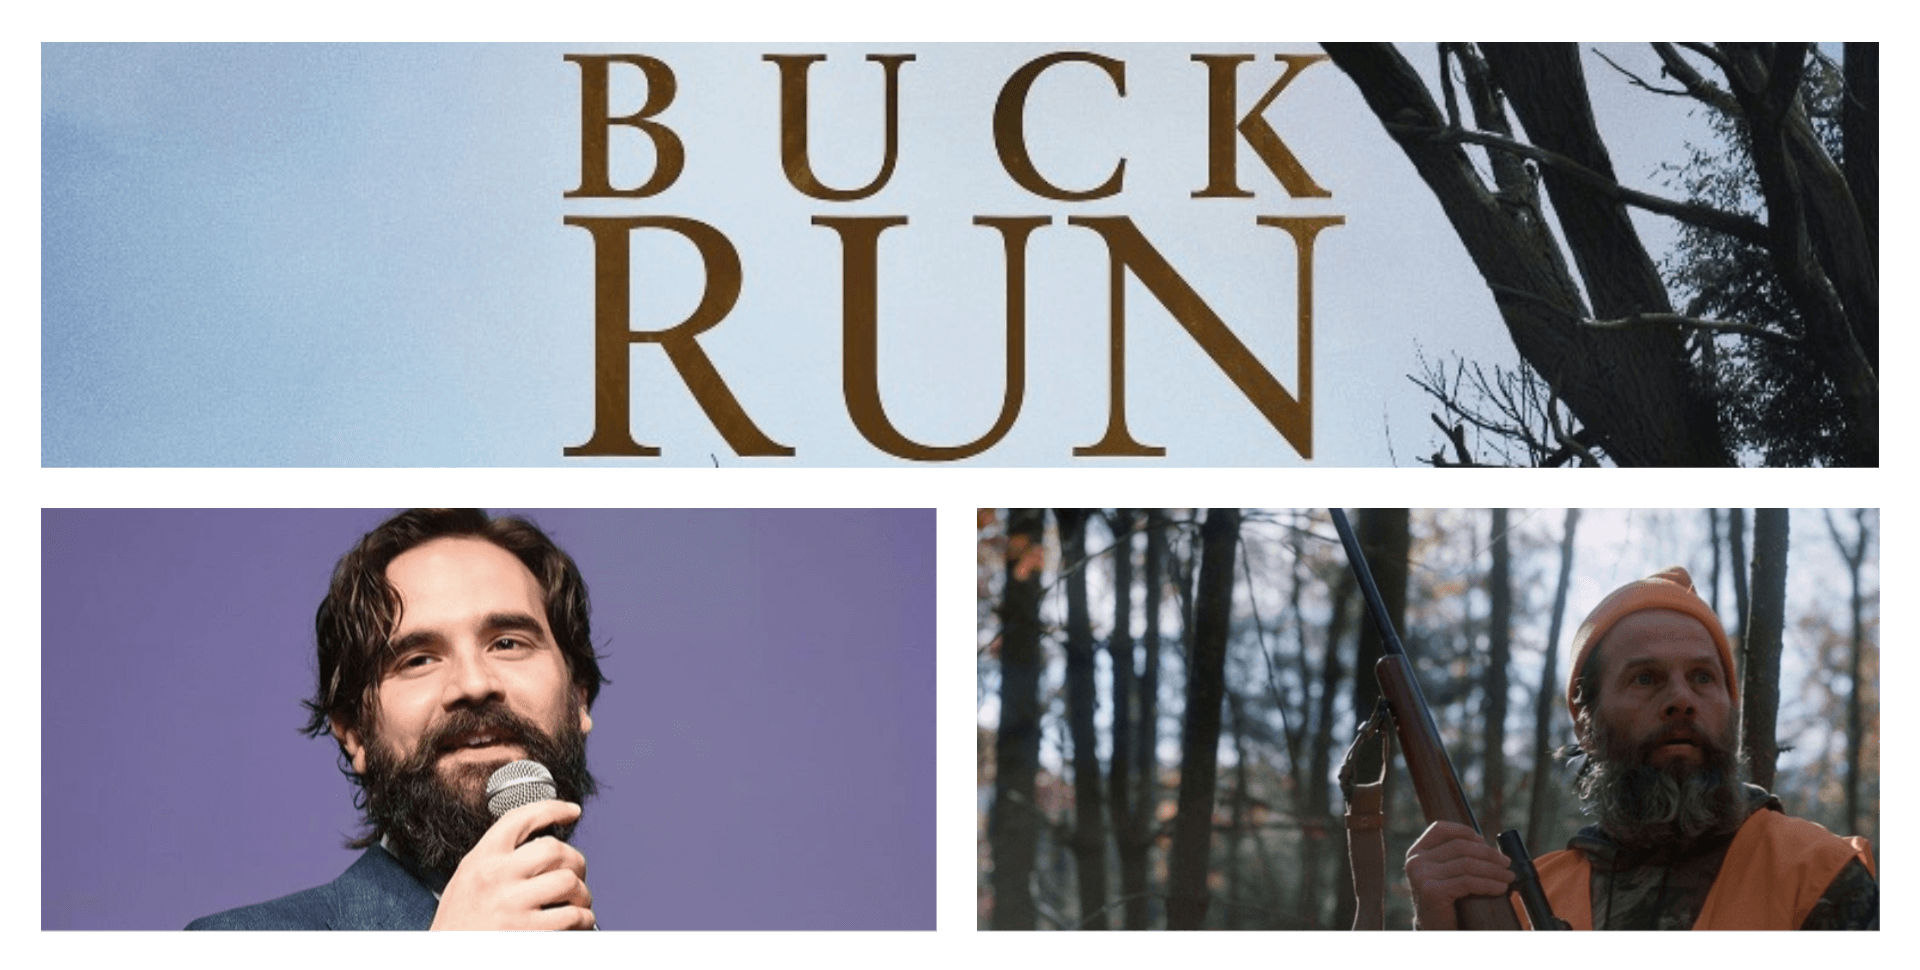 Image from Buck Run - Interview with Film Director Nick Frangione